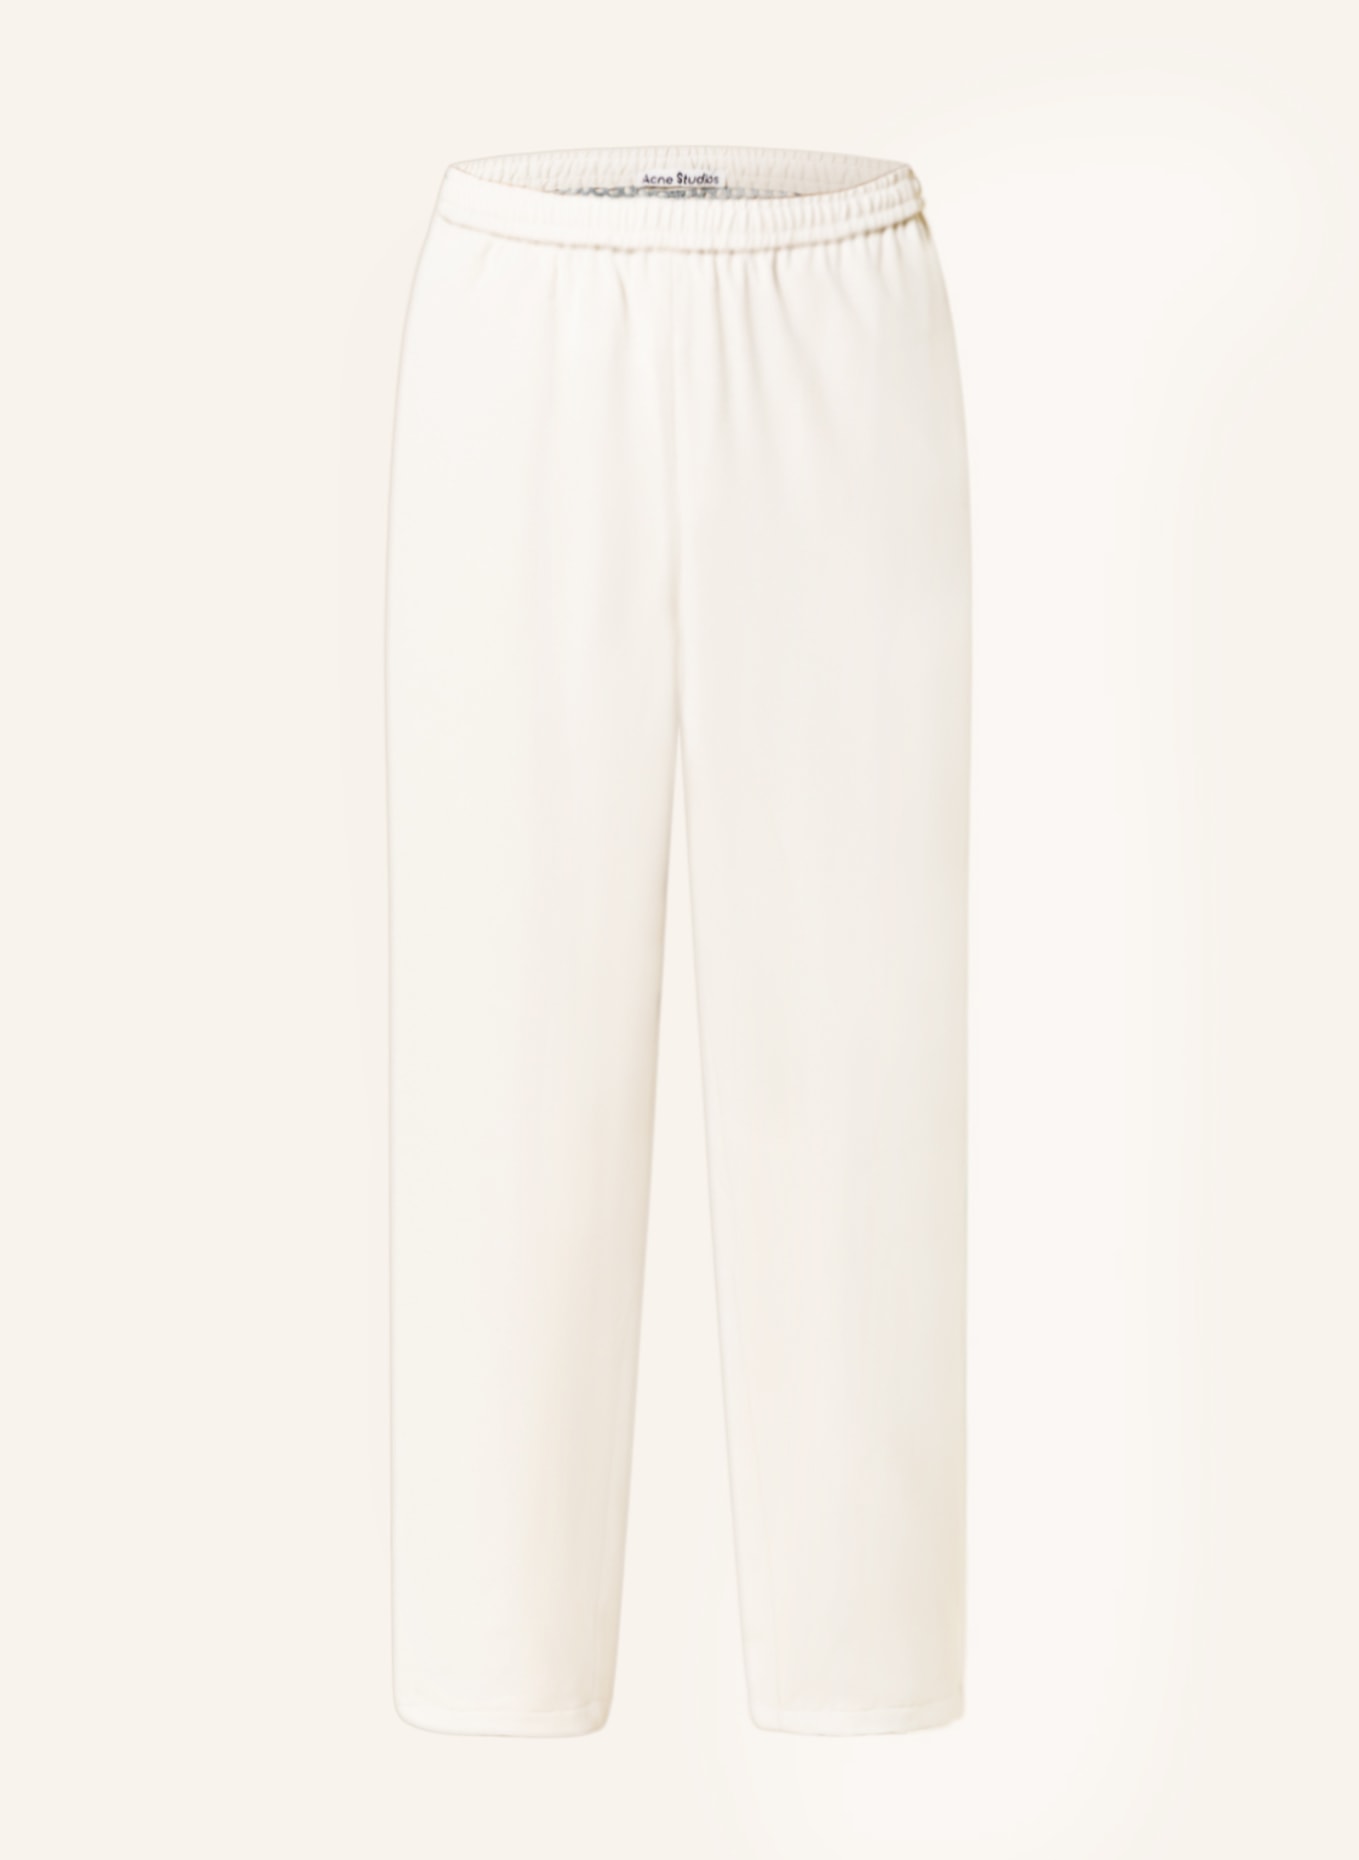 Acne Studios Pants in jogger style, Color: BEIGE (Image 1)